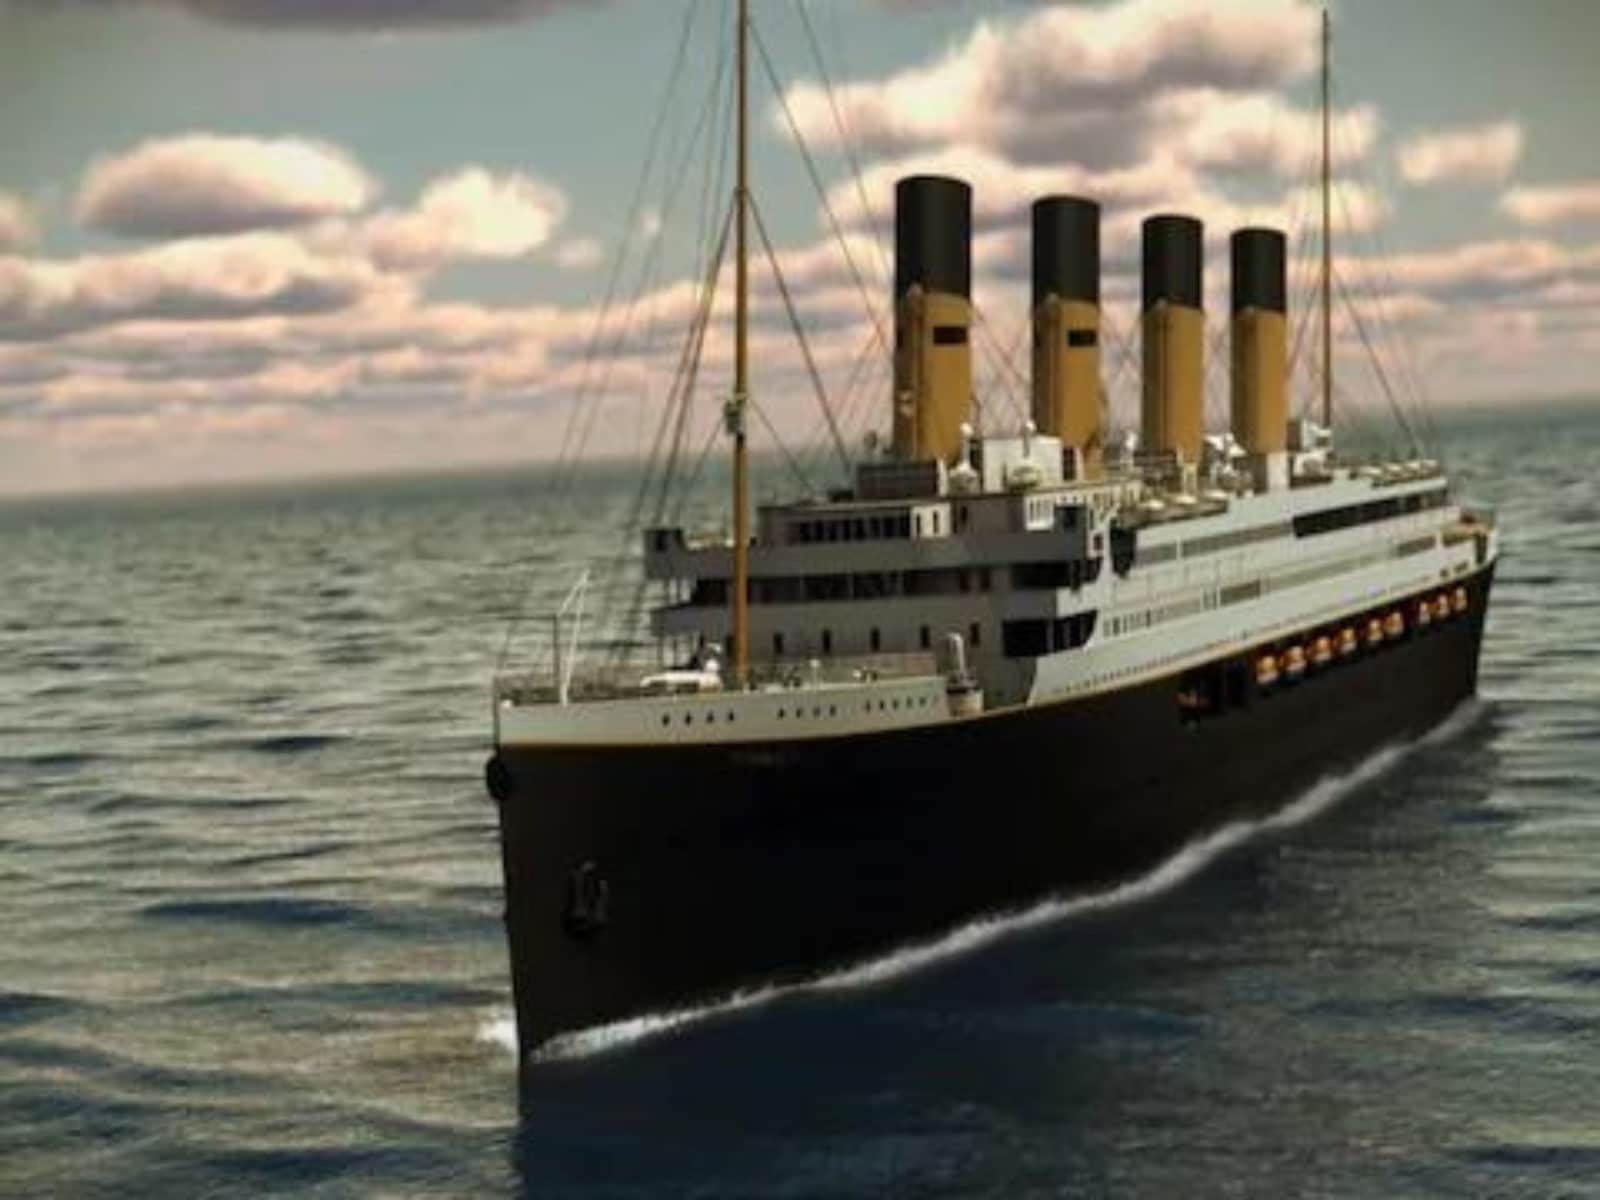 Blue Star's Titanic II Would Sail The Same Route As Original